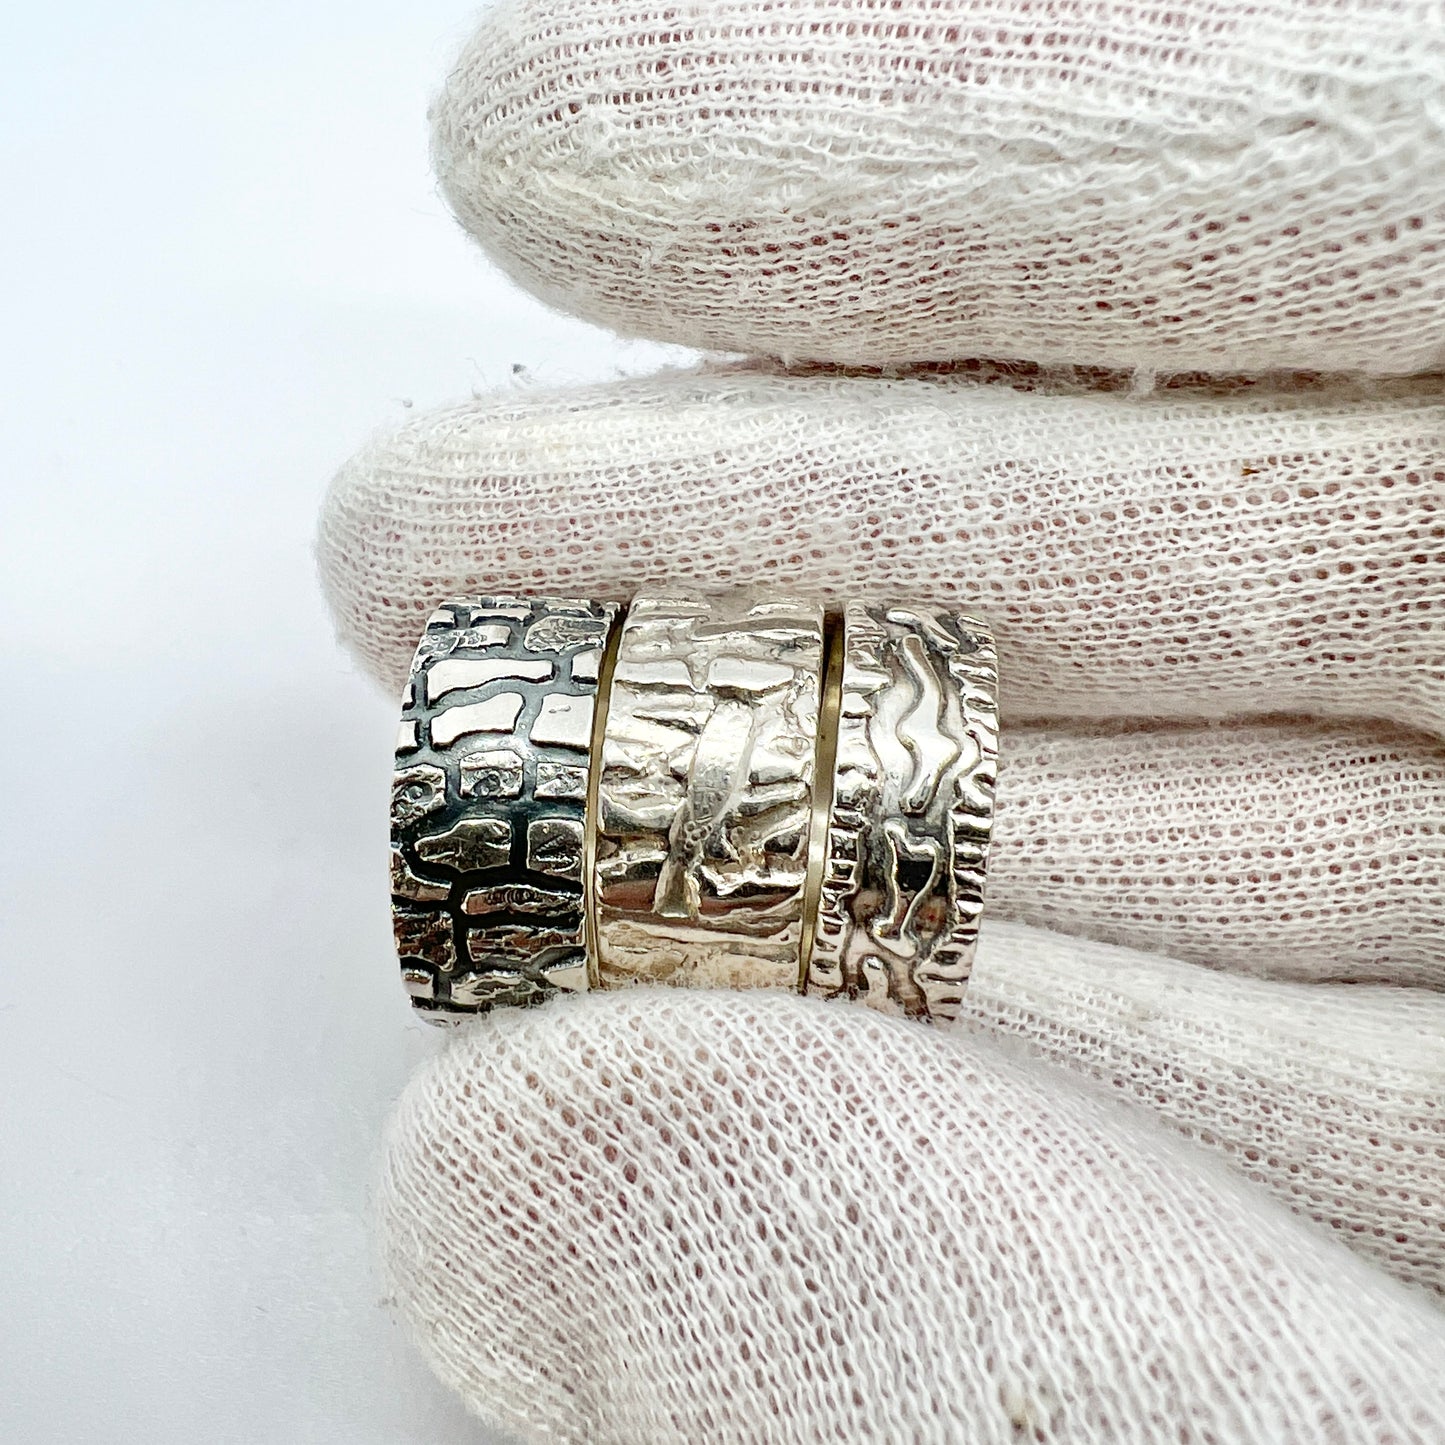 Finland c 1970s Vintage Solid Silver Ring Stack.